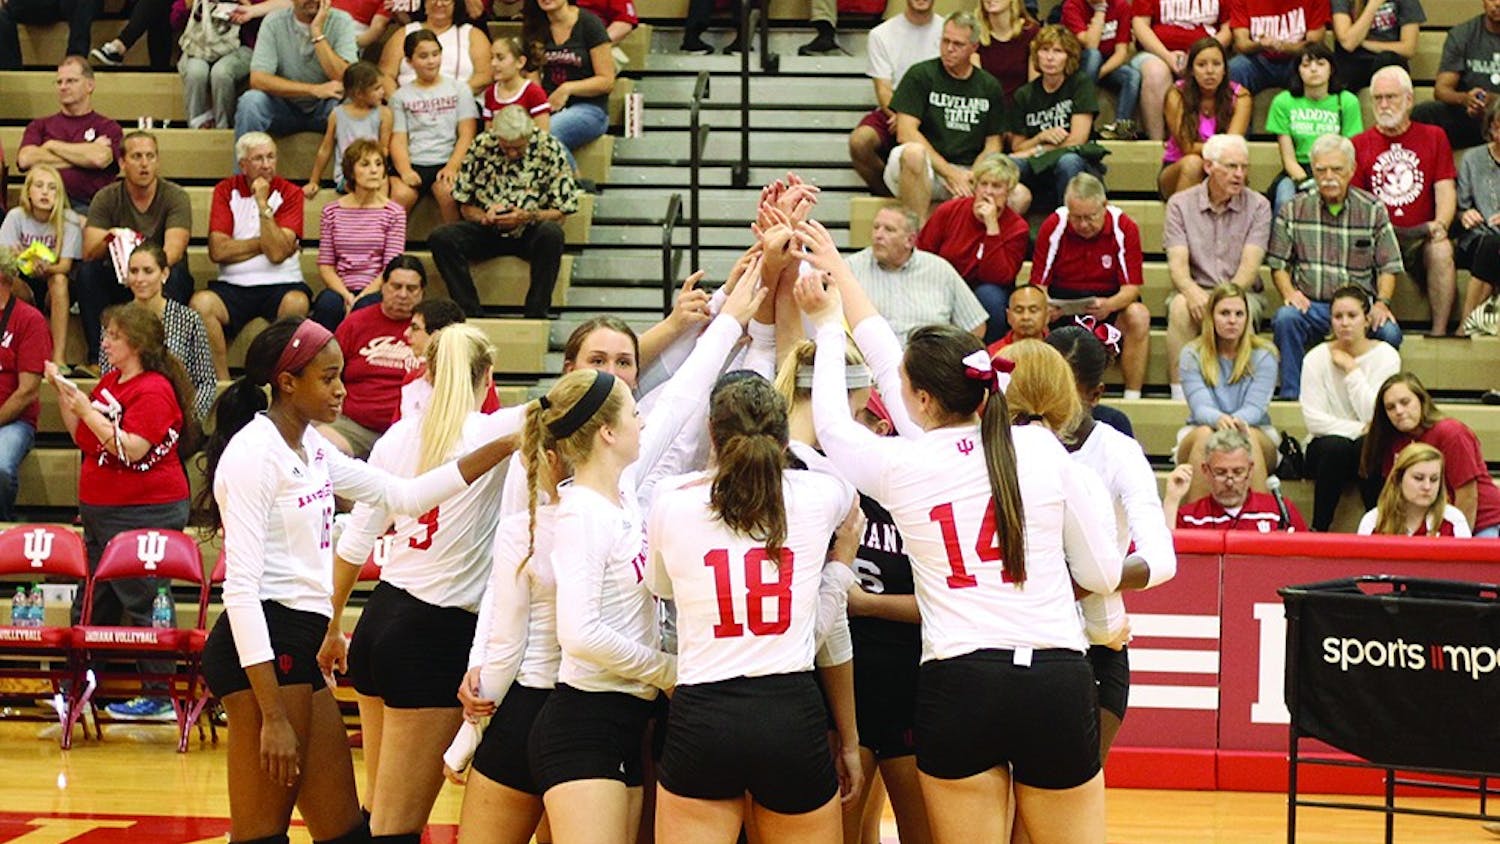 The IU volleyball team cheers before their game against Arkansas State on Sept. 16, 2016 at IU University Gym. The team will open up Big Ten Conference play against Northwestern on Friday.&nbsp;